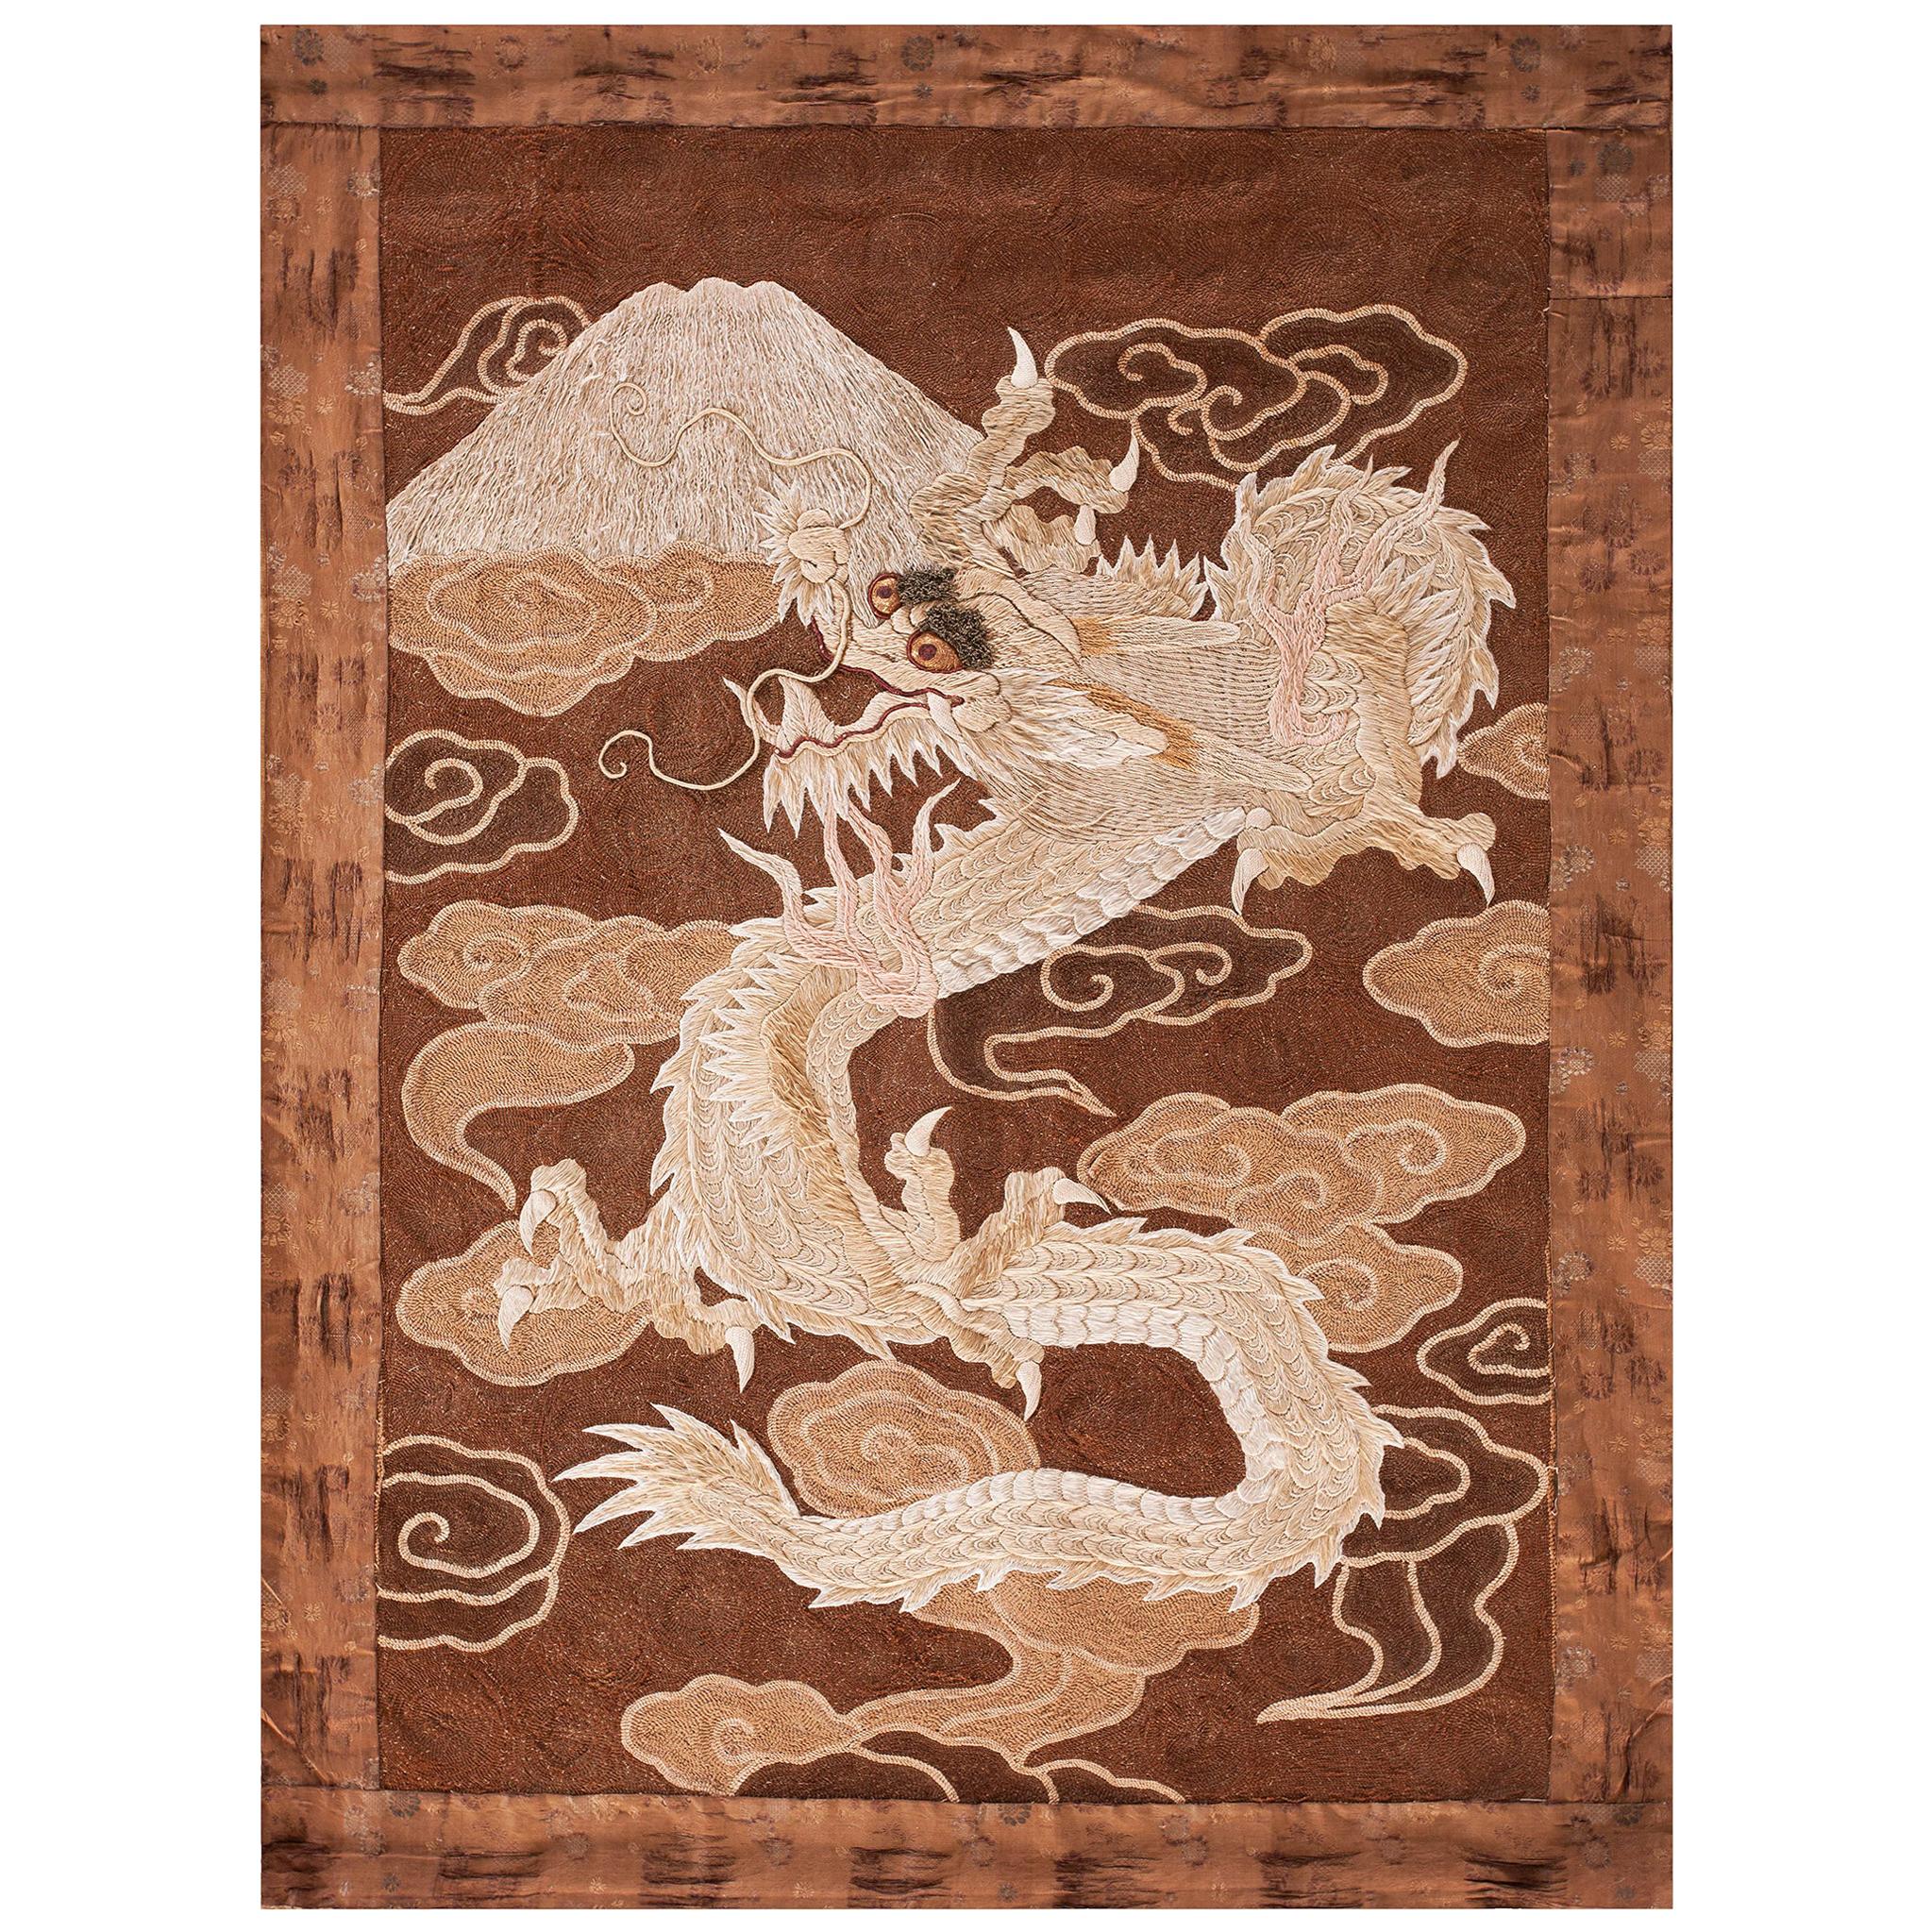 Late 19th Century Chinese Wool & Silk Dragon Embroidery (2'10" x 4' - 86 x 122) For Sale